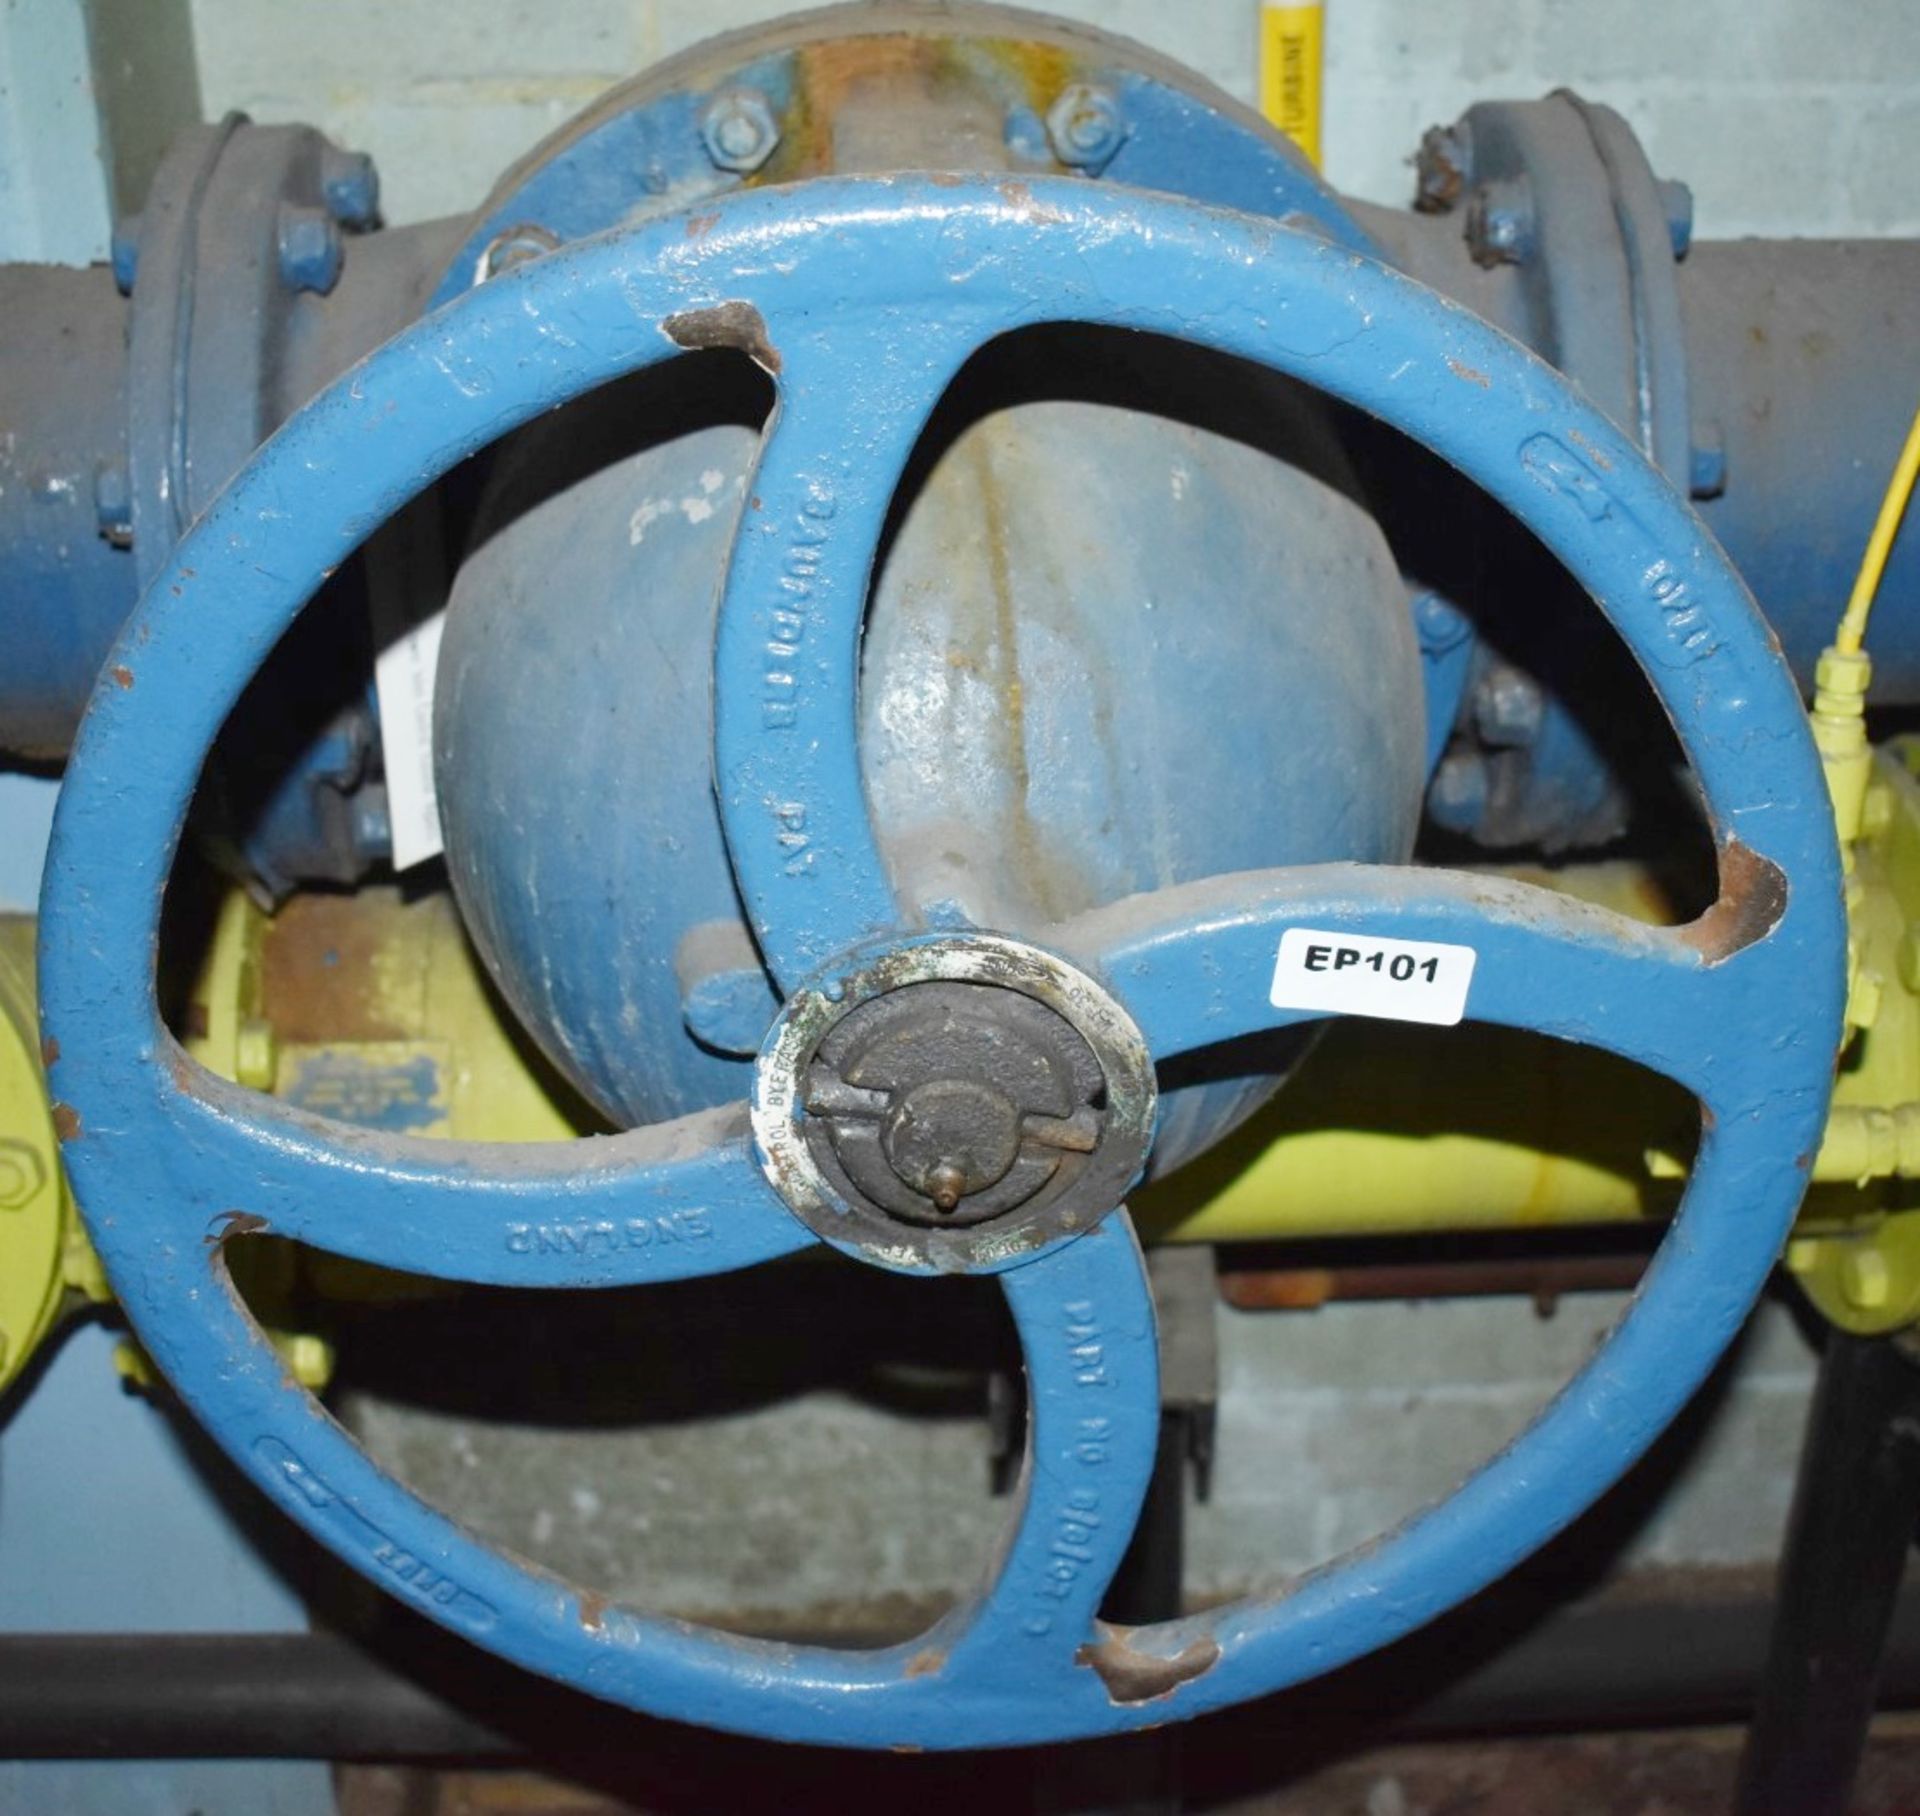 1 x Saunders Diaphragm Valve - Ref EP101 - Pipe Connection Size 30cm - CL451 - Location: Scunthorpe, - Image 2 of 6